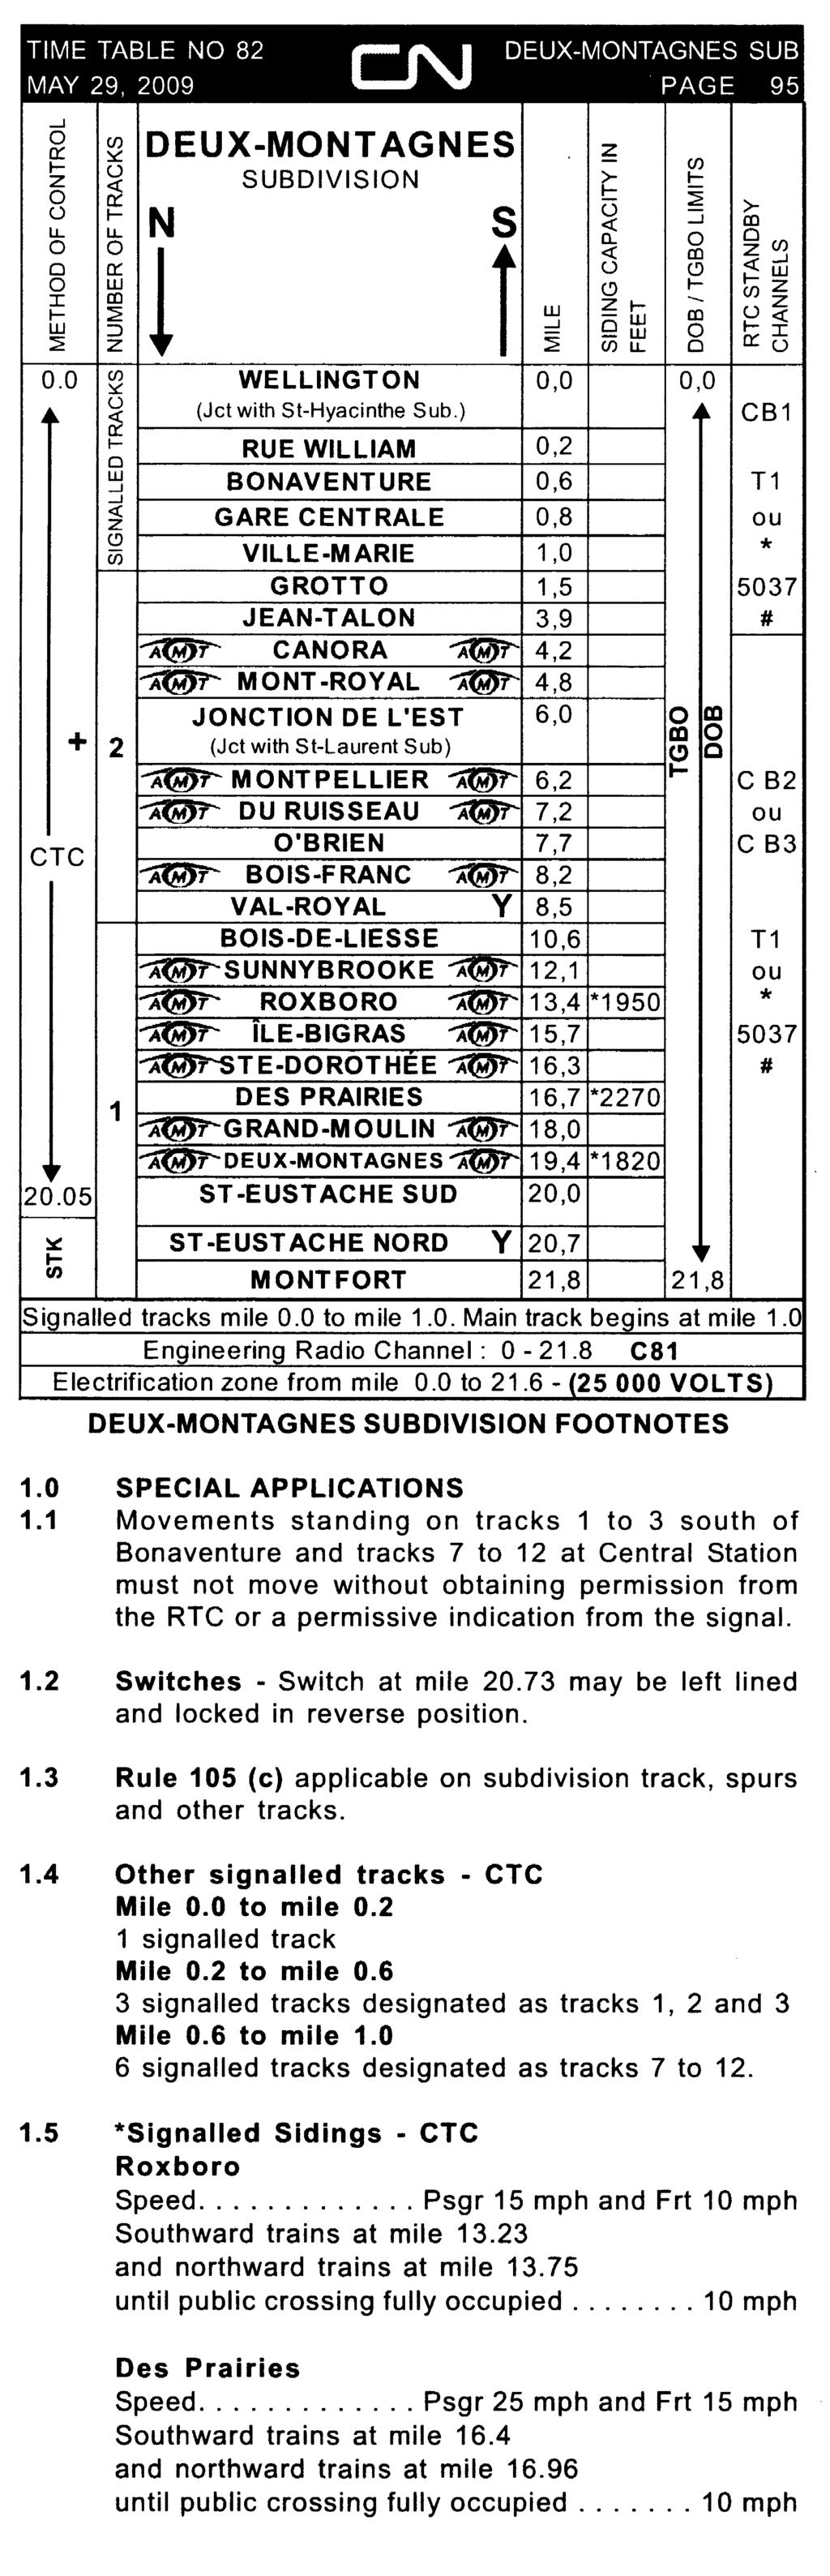 TIME TABLE NO 82 p-~ ^ I DEUX-MONTAGNES SUB MAY 29, 2009 I I \ PAGE 95 i t DEUX-MONTAGNES SUBDIVISION N S LLJ _l ^ 0.0 WELLINGTON 0,0 0, 0 (Jet with St-Hyacinthe Sub.